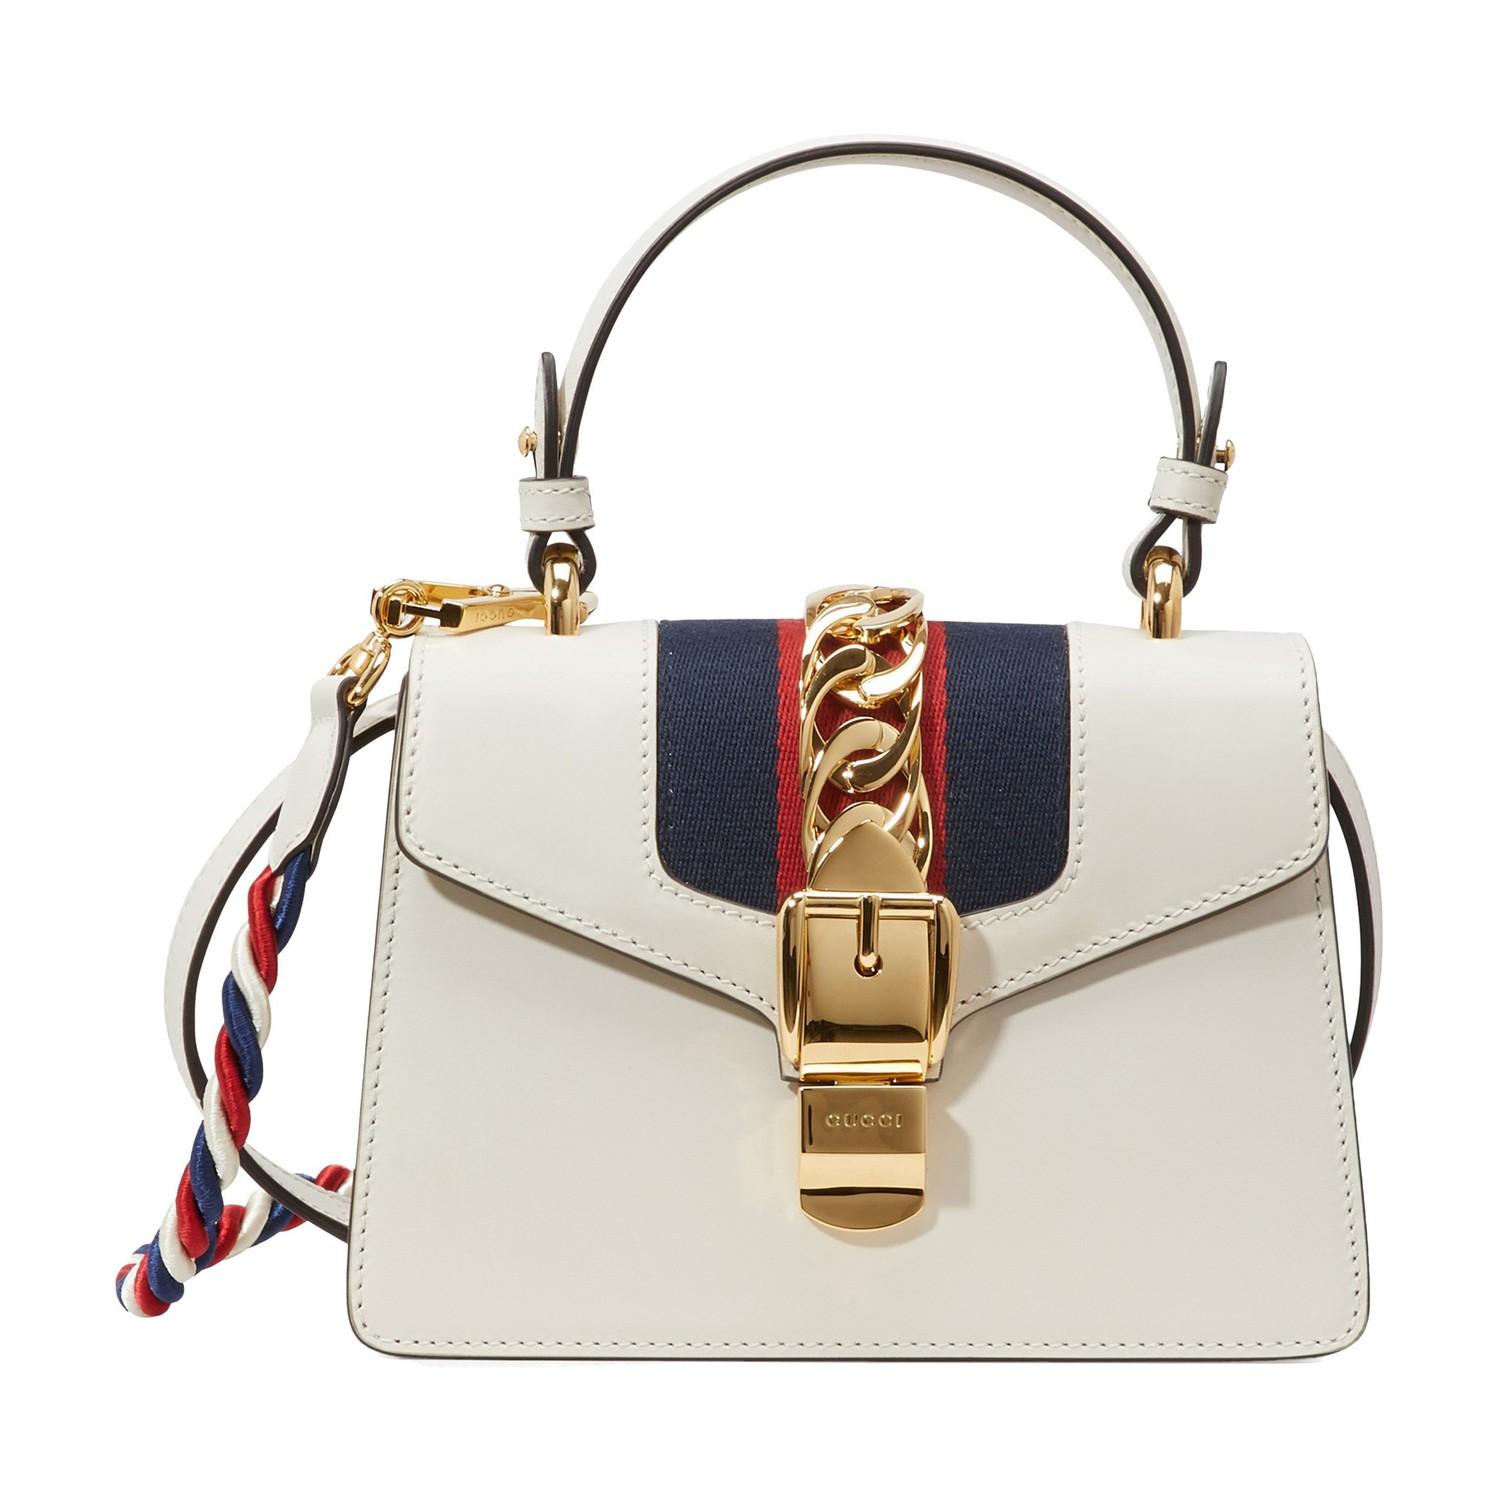 Gucci Sylvie Leather Mini Bag in White | Lyst